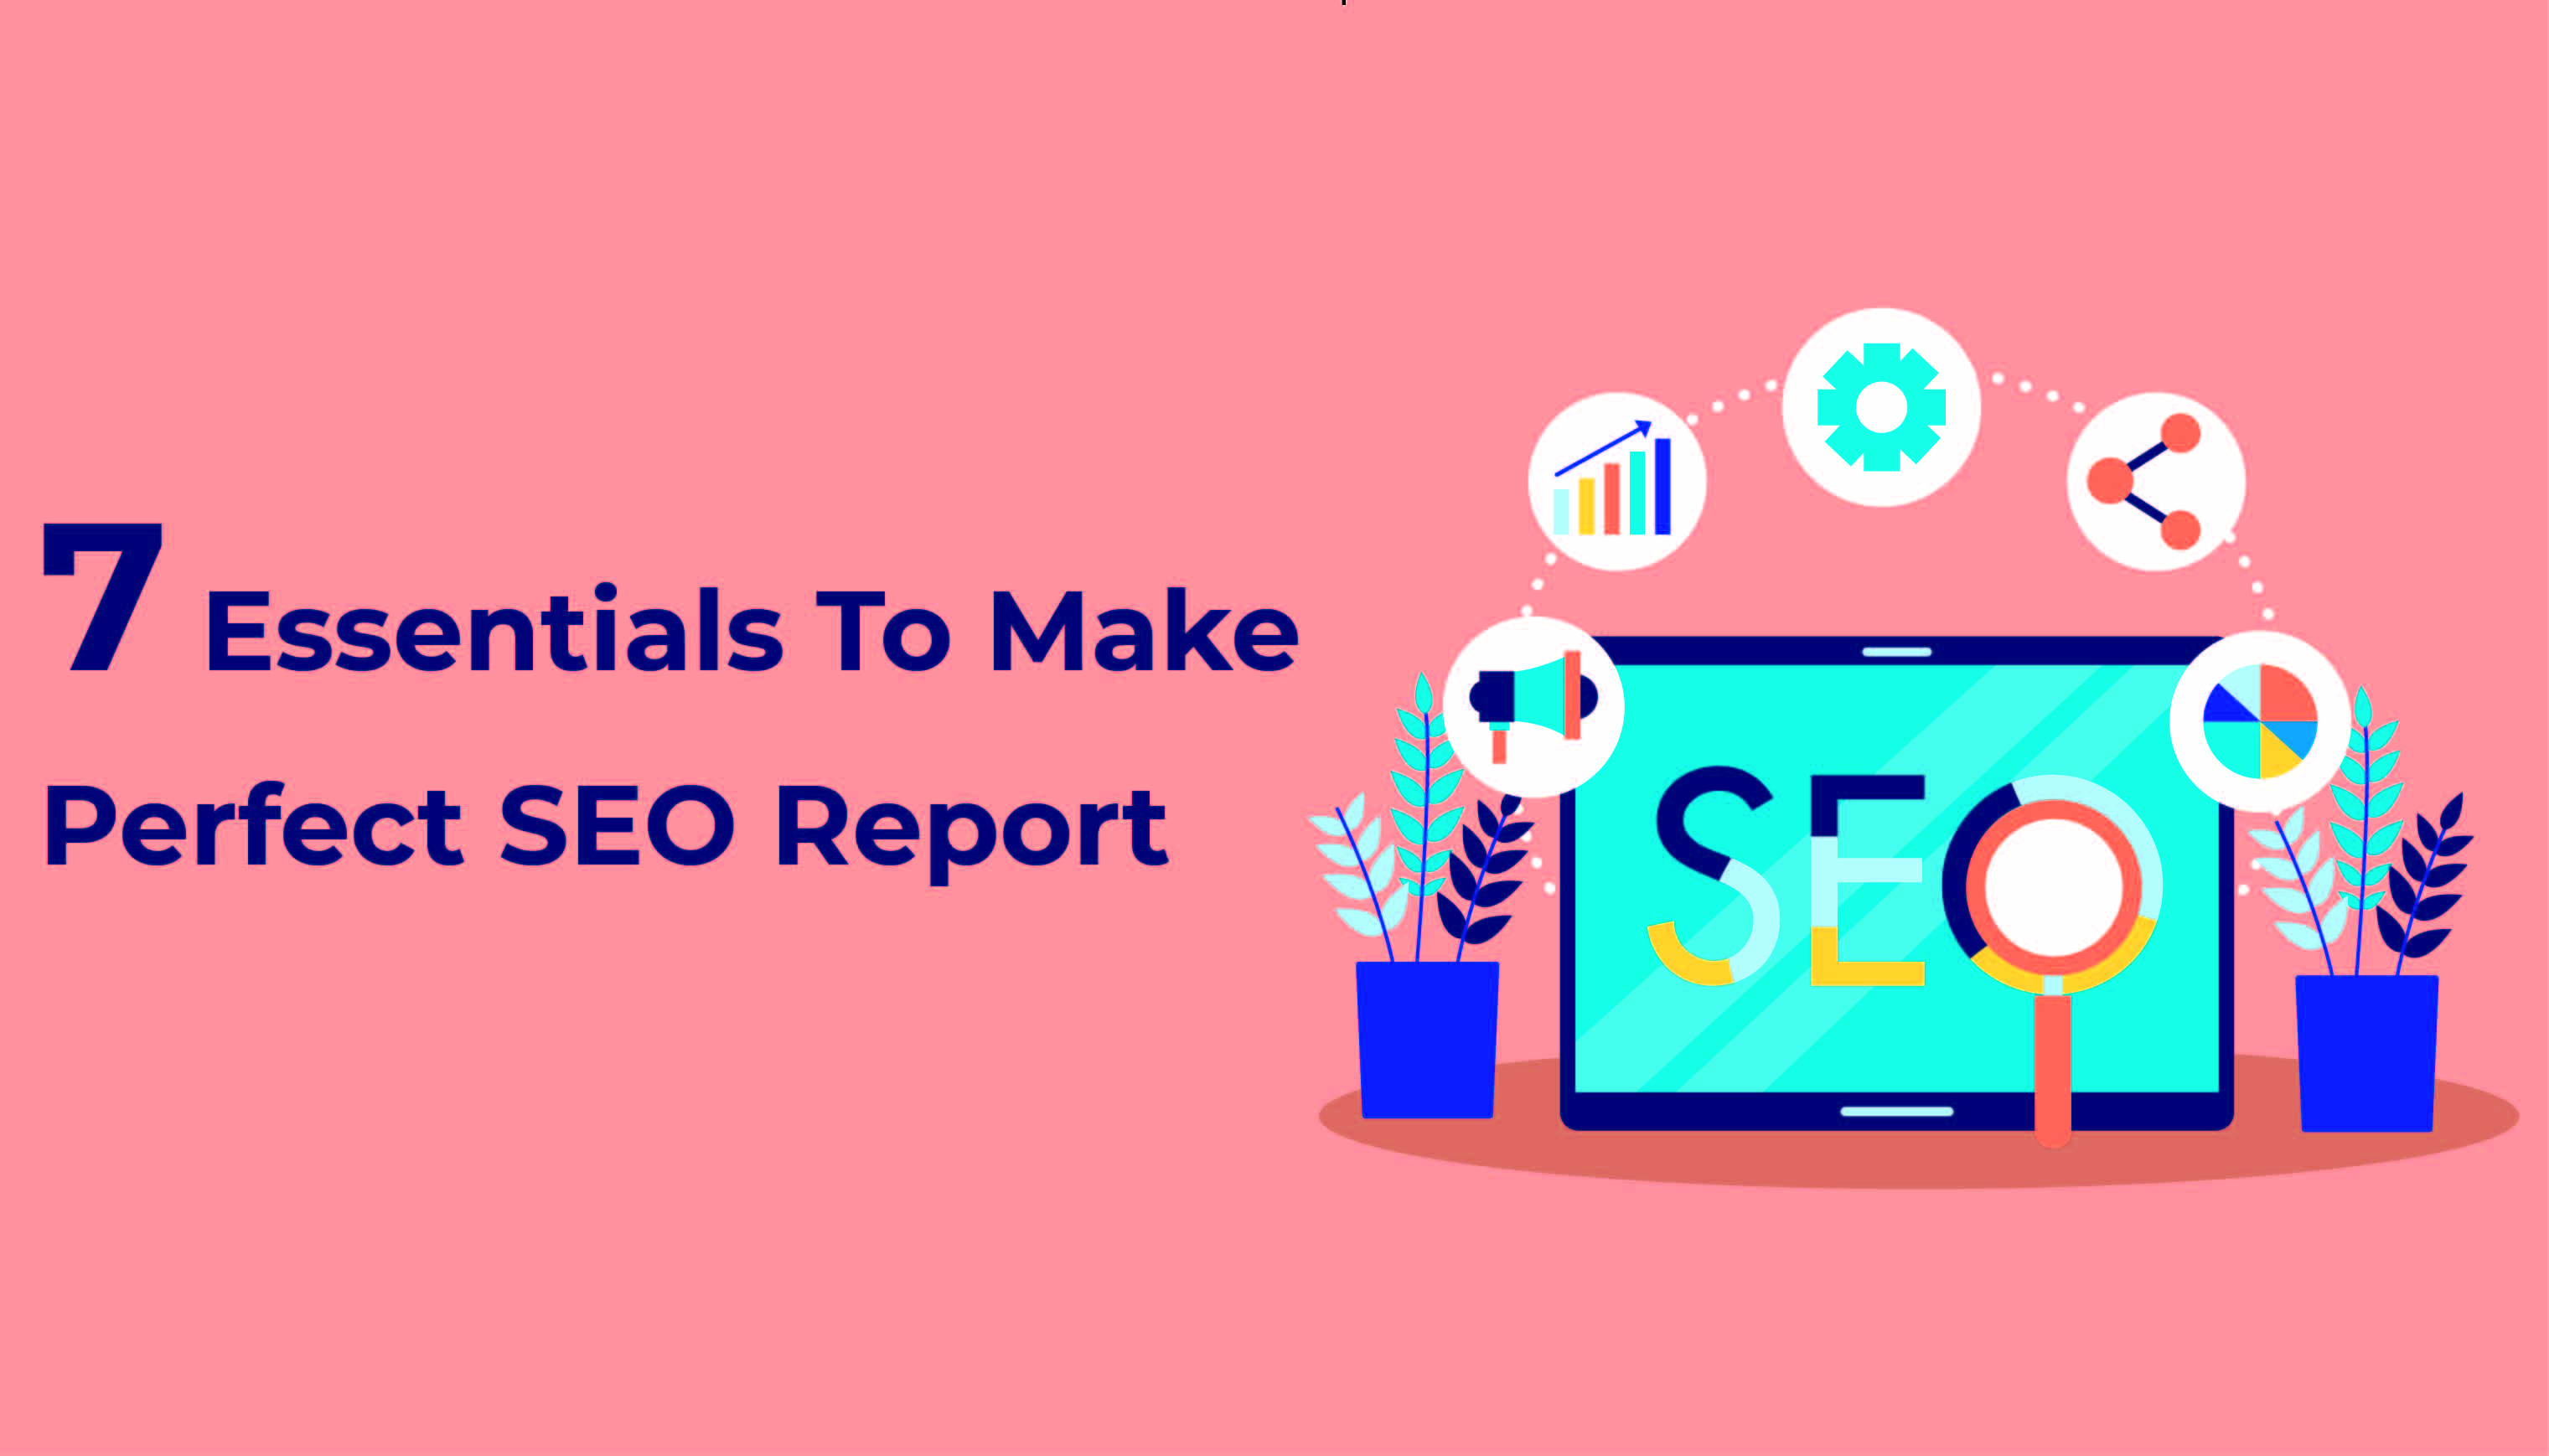 7 Essentials To Make Perfect SEO Reports For Your Clients